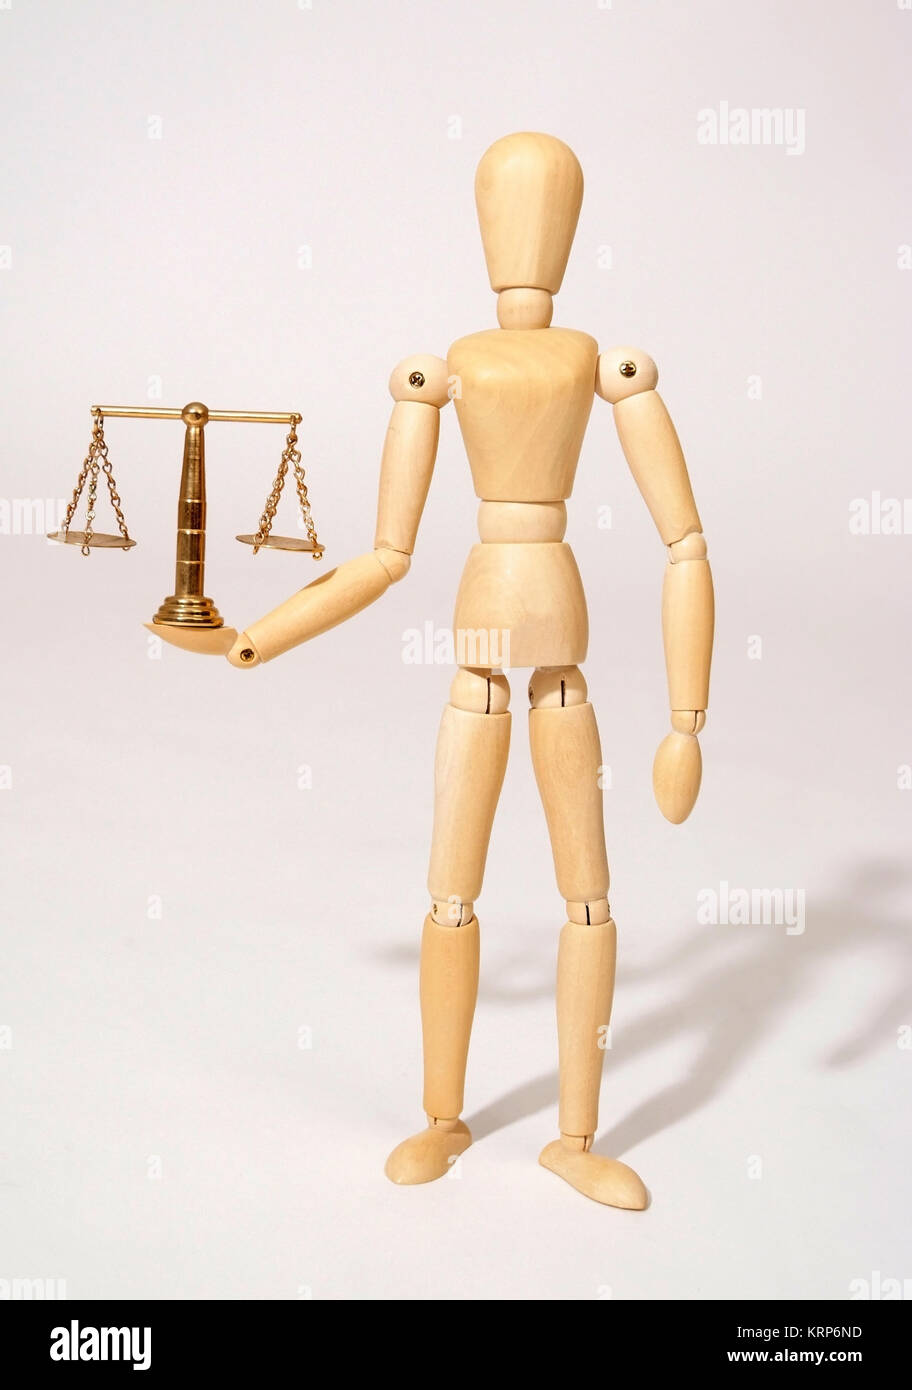 Holzpuppe mit Messingwaage, Symbolbild Gerechtigkeit - jointed doll with scale Stock Photo